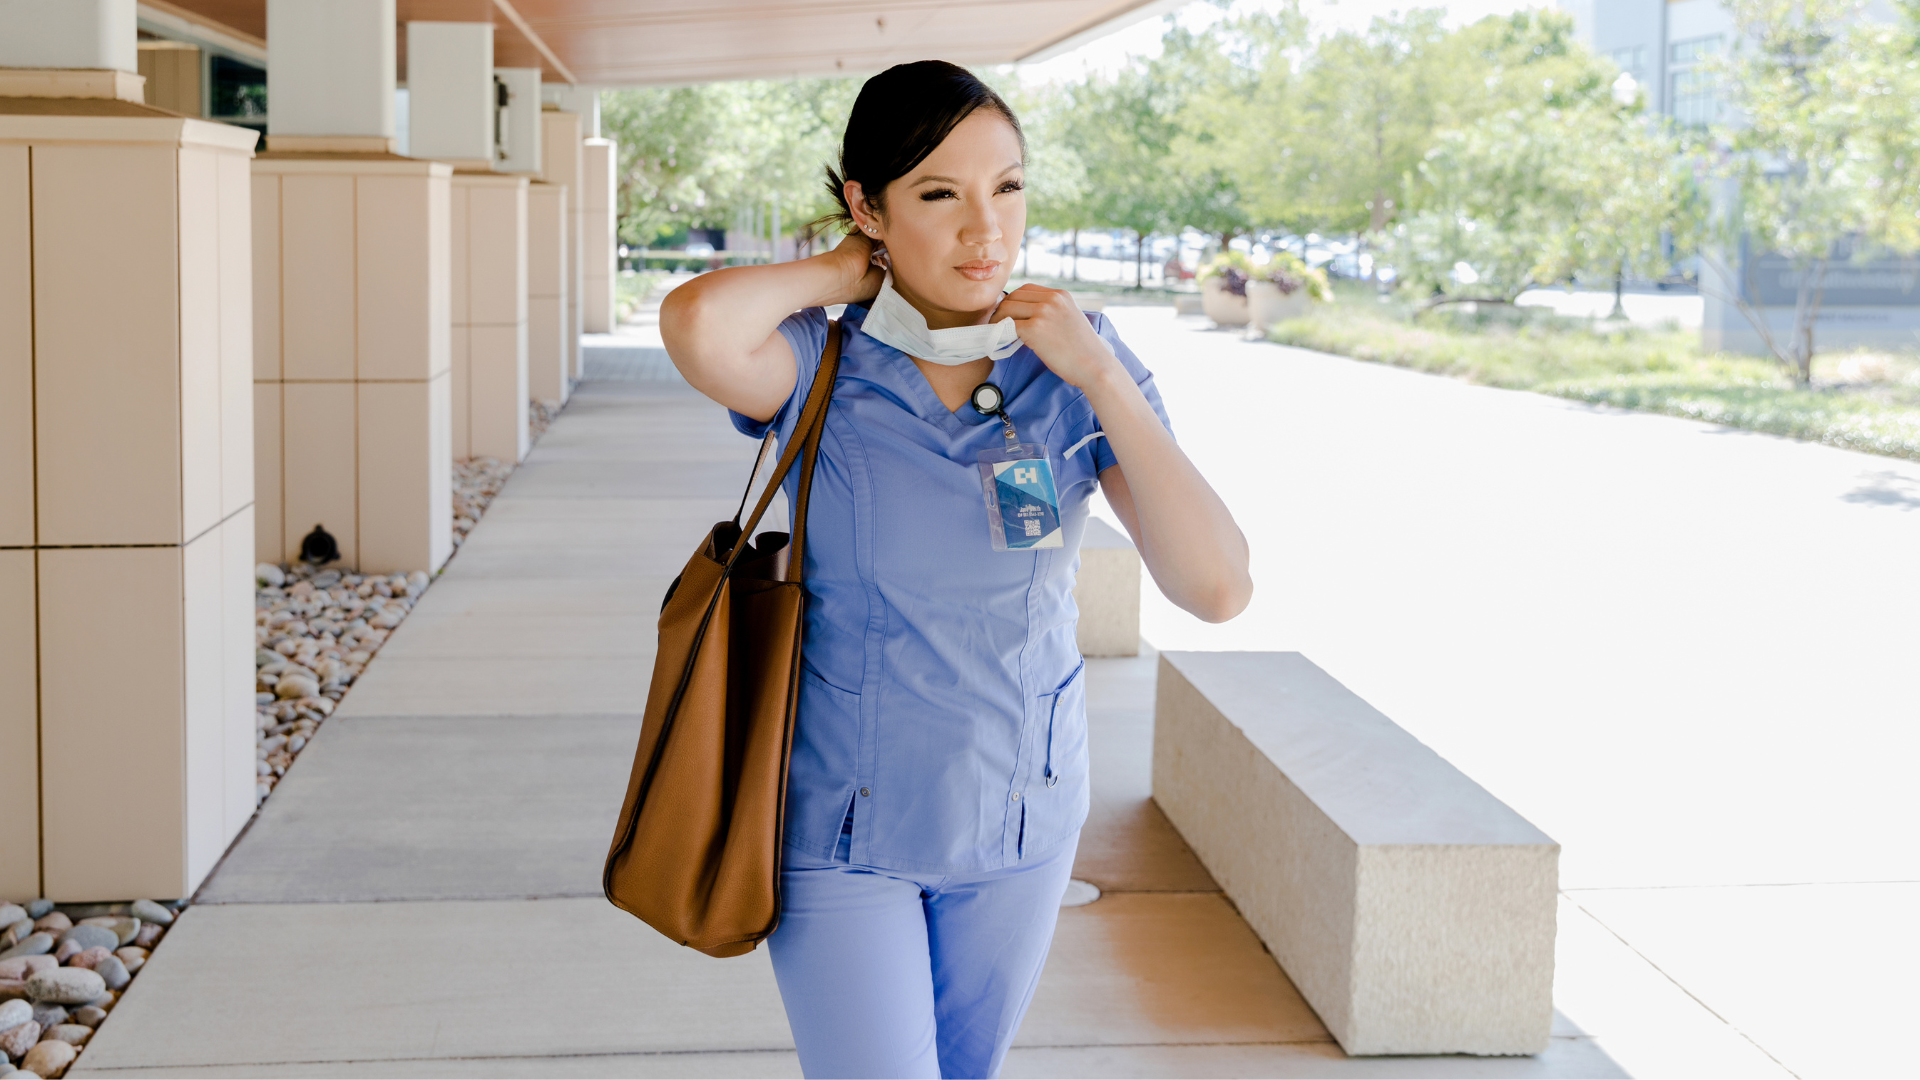 Nurse heading to work and showing signs of emotional labor.